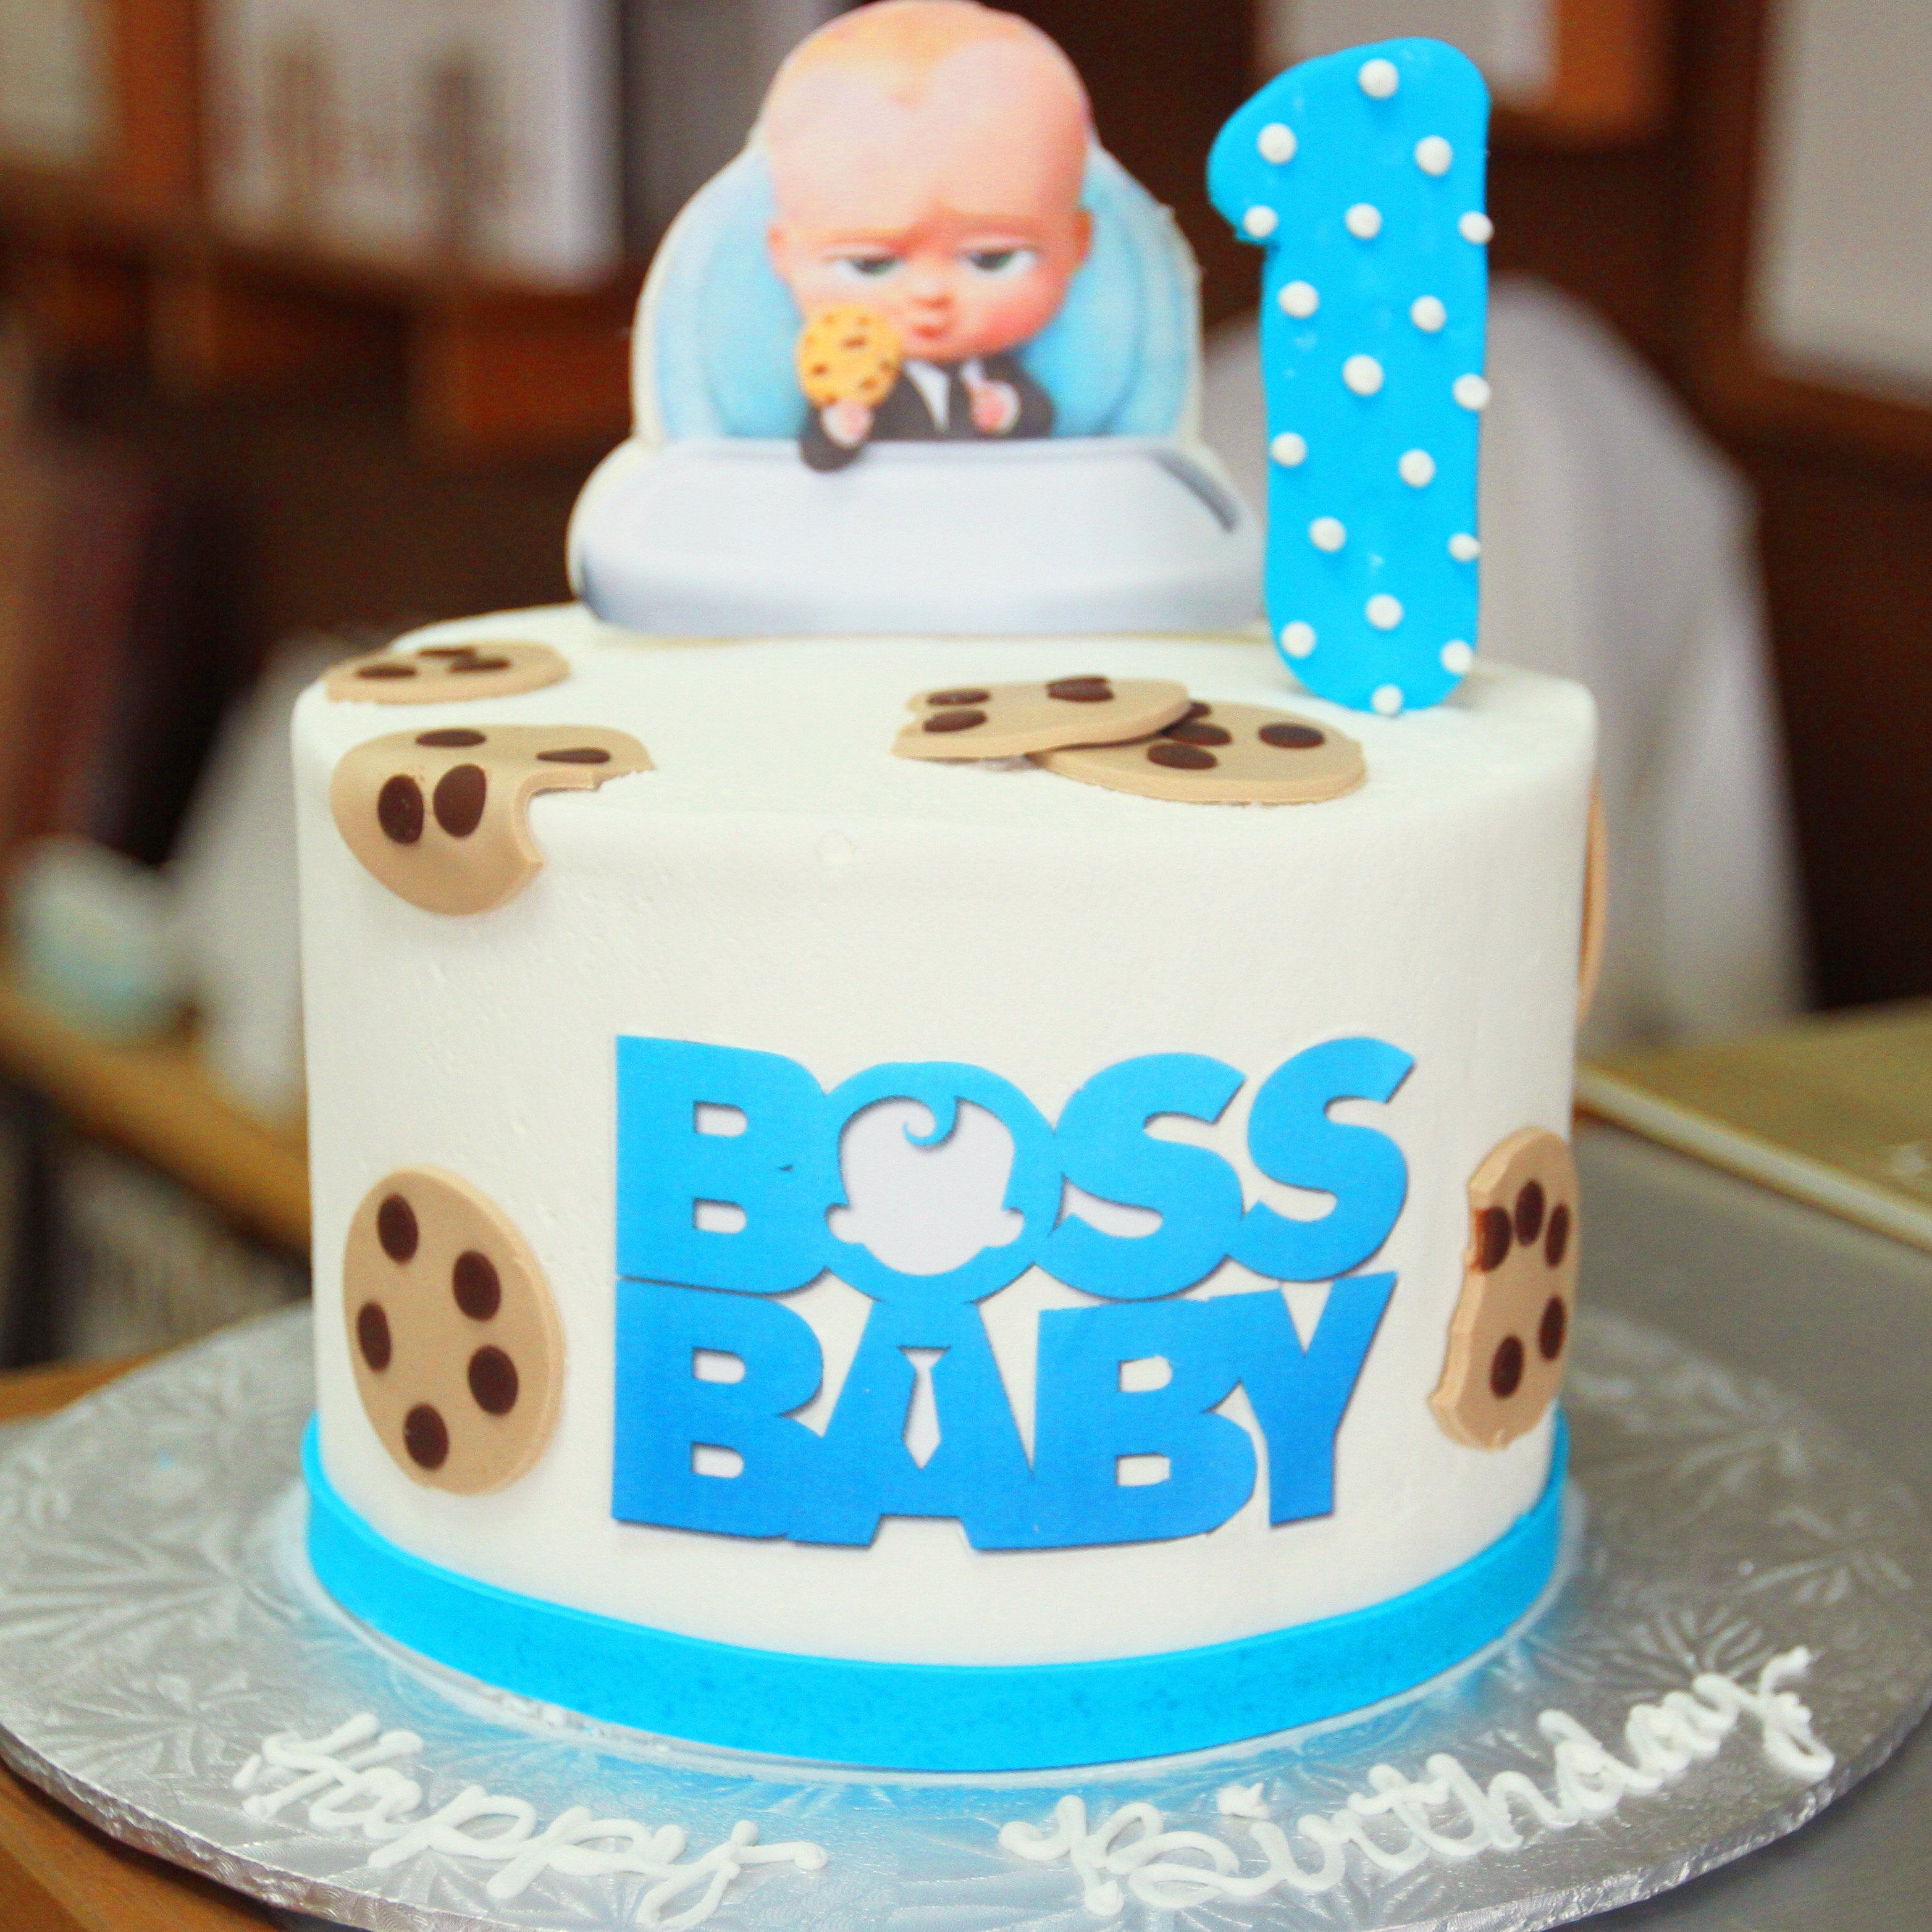 Best Boss Baby Theme Cake In Indore | Order Online